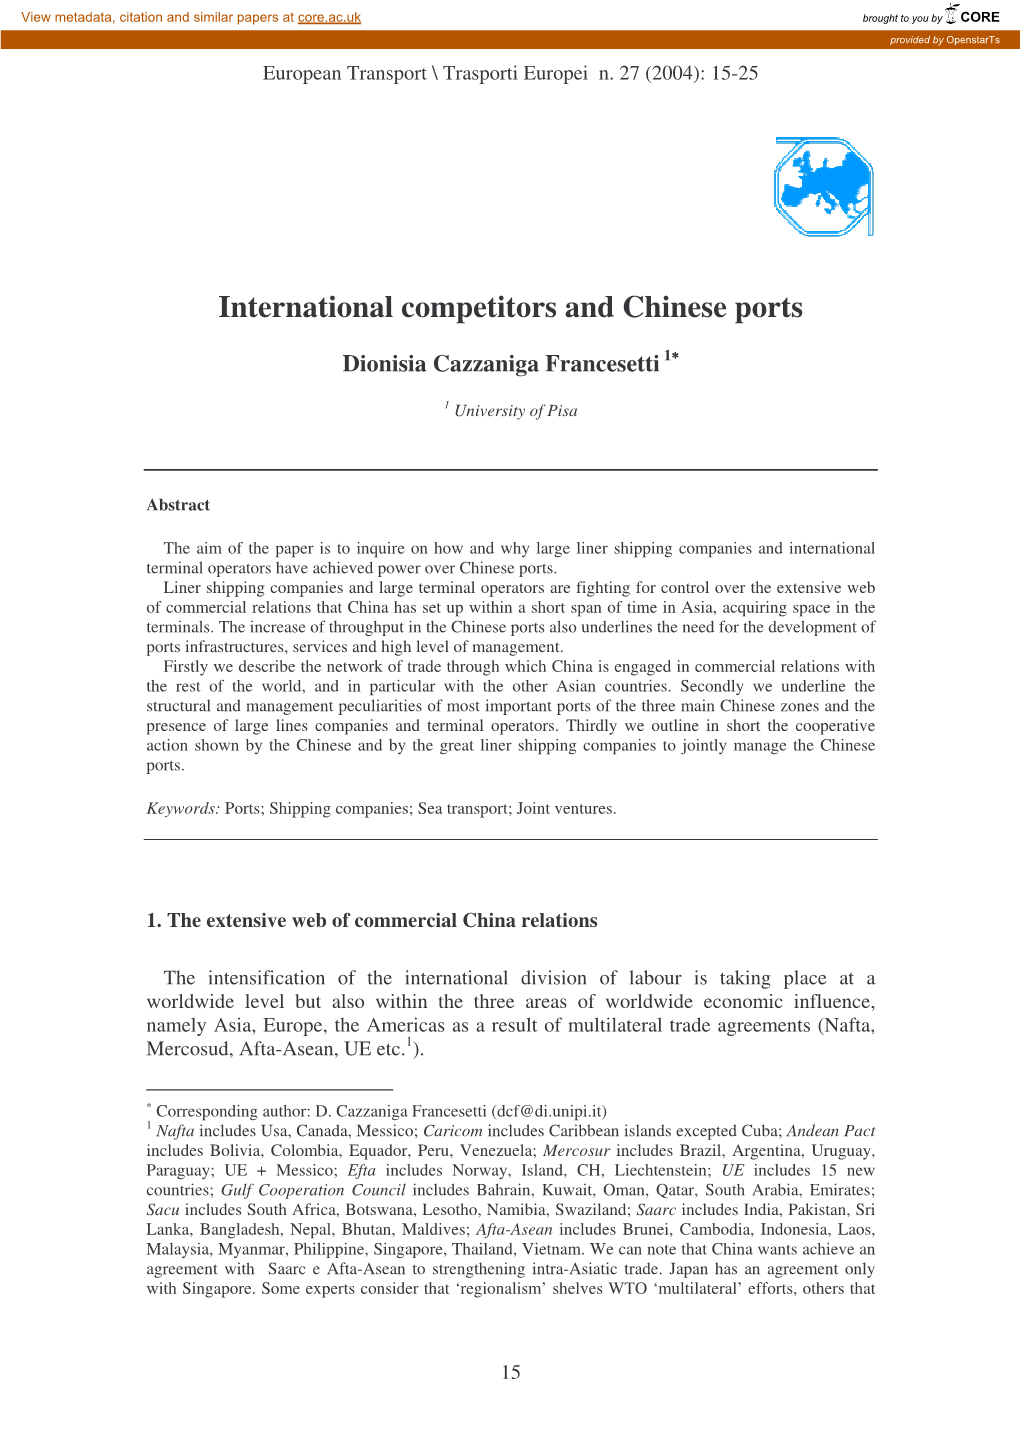 International Competitors and Chinese Ports